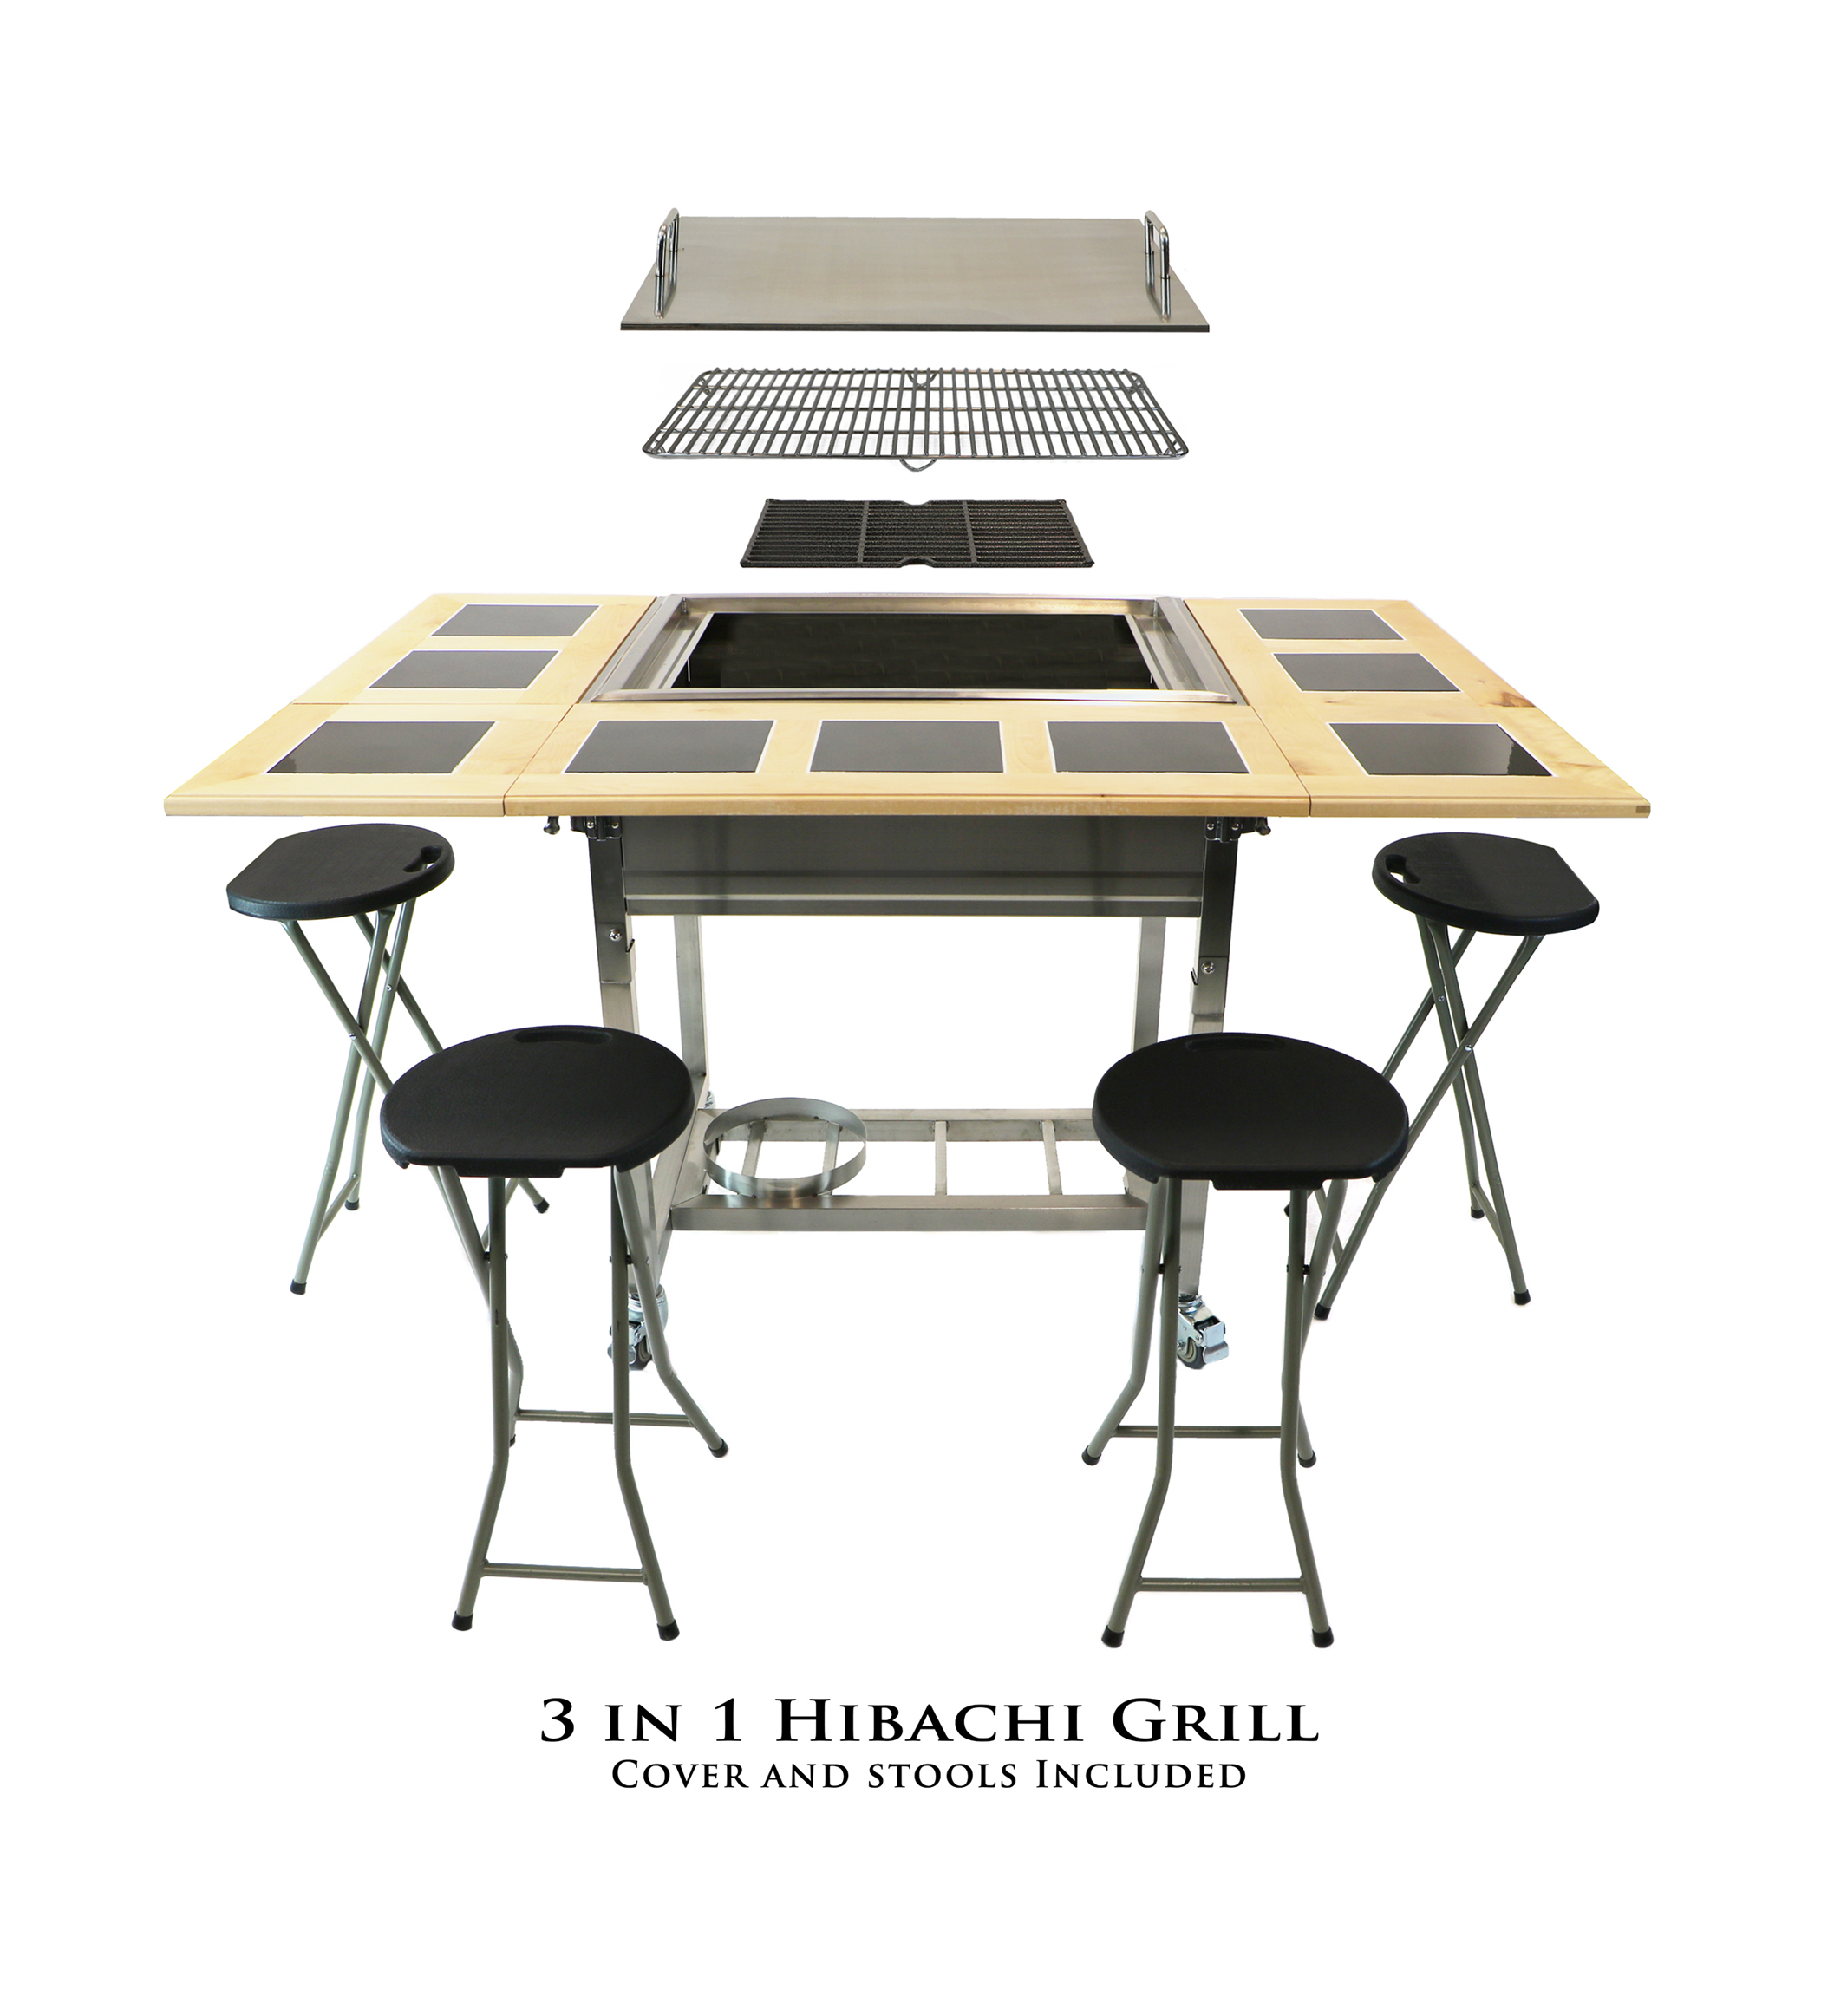 My Hibachi BBQ - Outdoor 3-in-1 Sit Around Grill w/ Flat Top Griddle, BBQ Rack and Cast Iron Burner - Portable for Tailgating - image 1 of 15